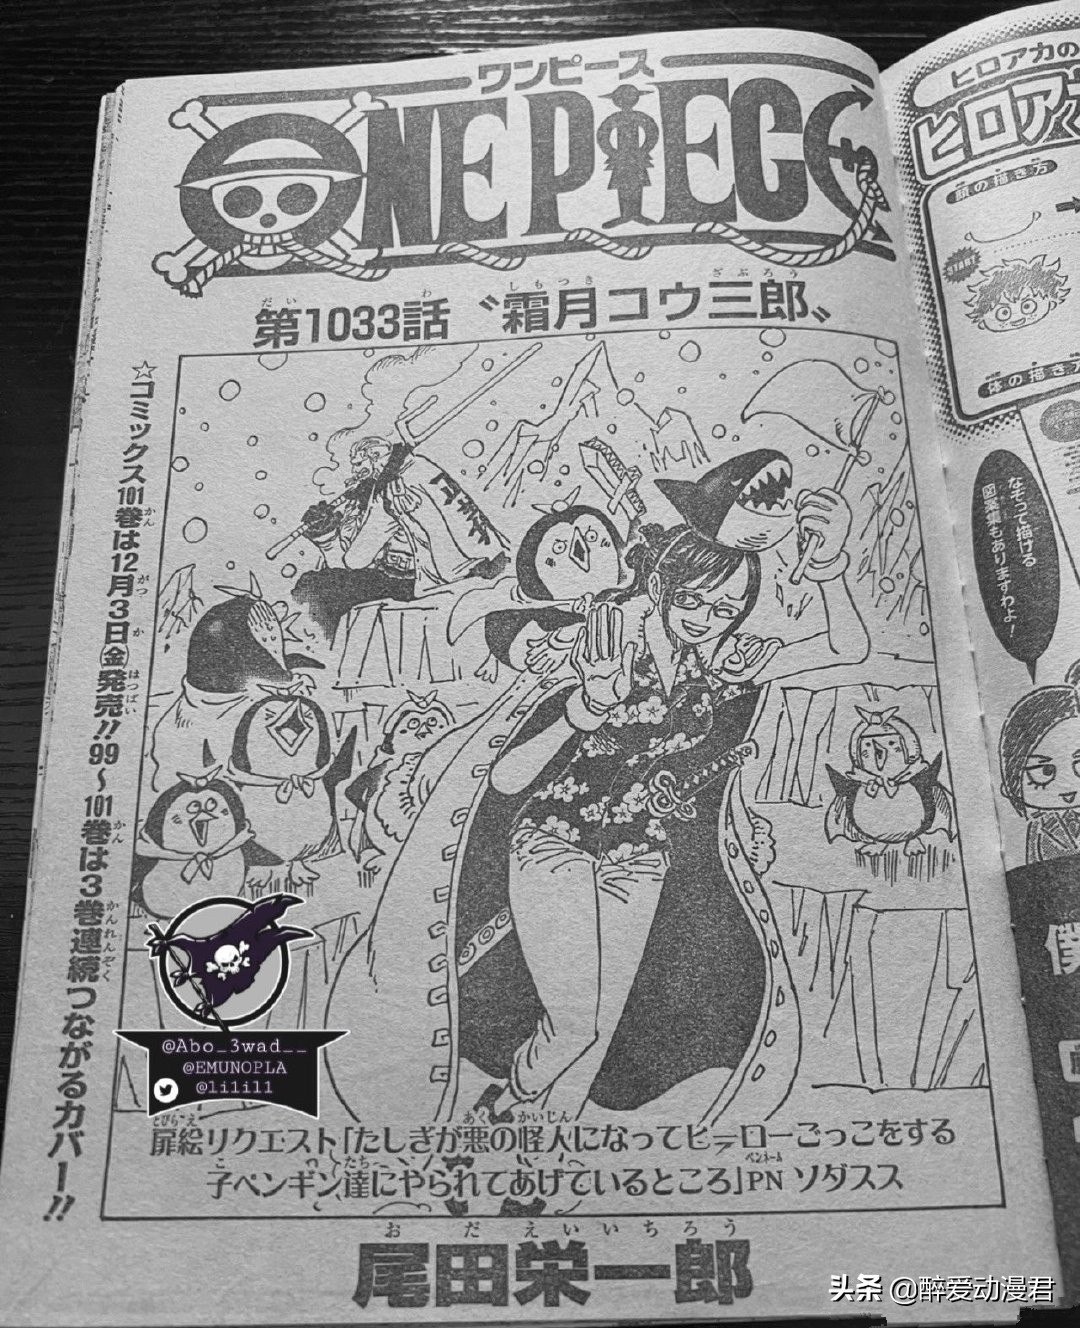 One Piece Chapter 1033 full picture, in order to defeat the flames ...